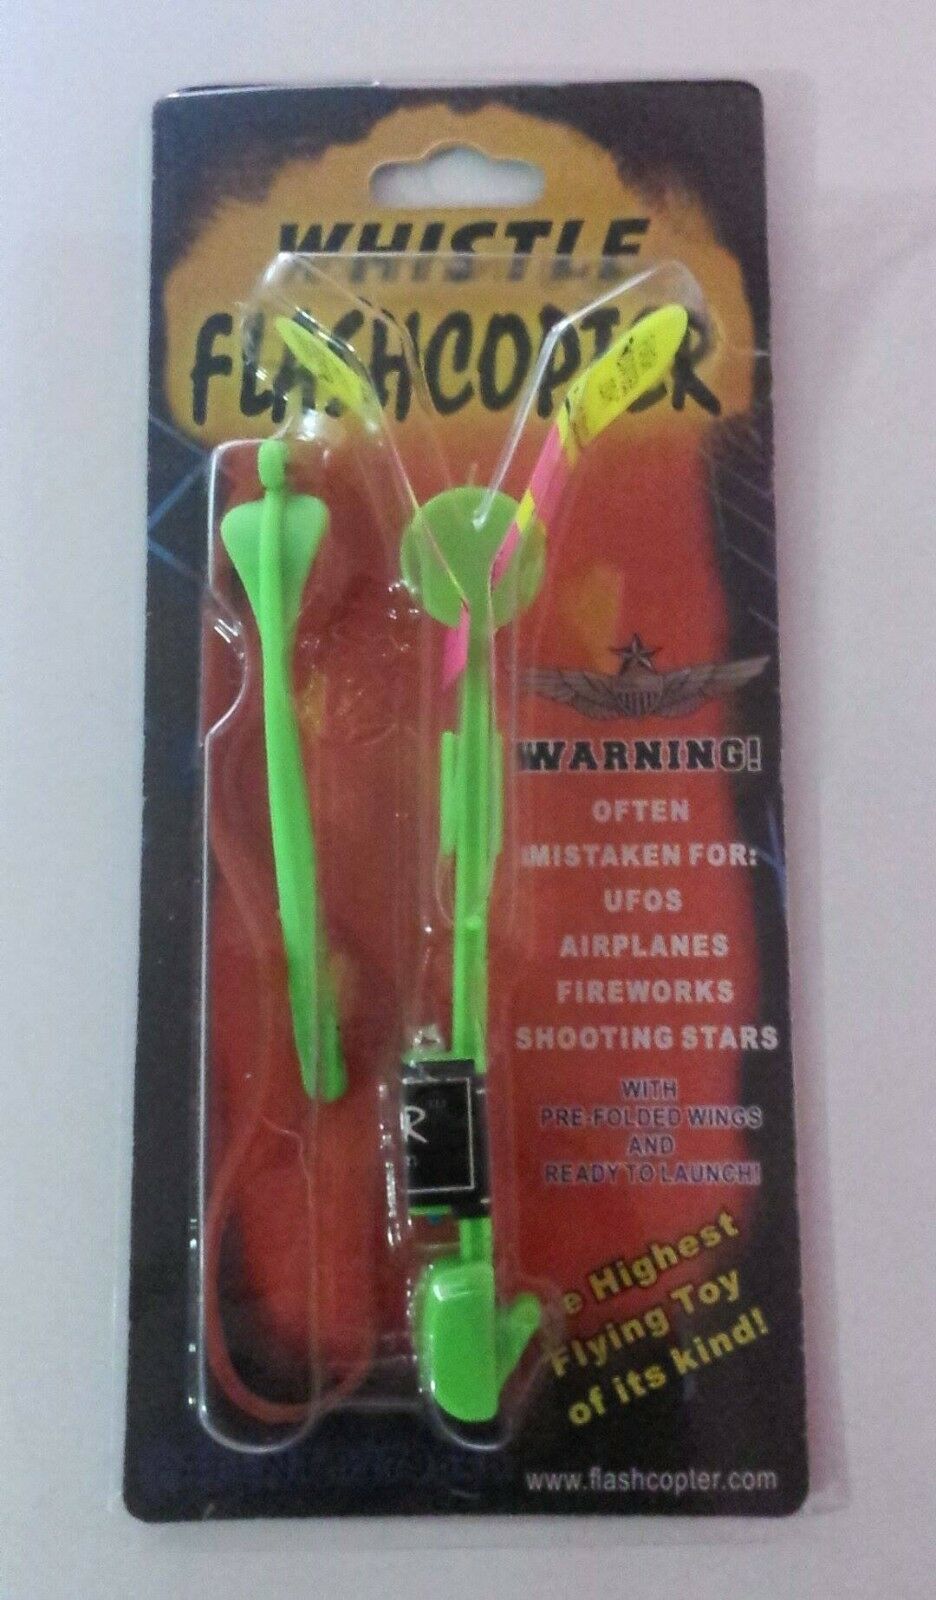 Whistle Flashcopter The Highest Flying Toy of its Kind 1xRandom Color and Design